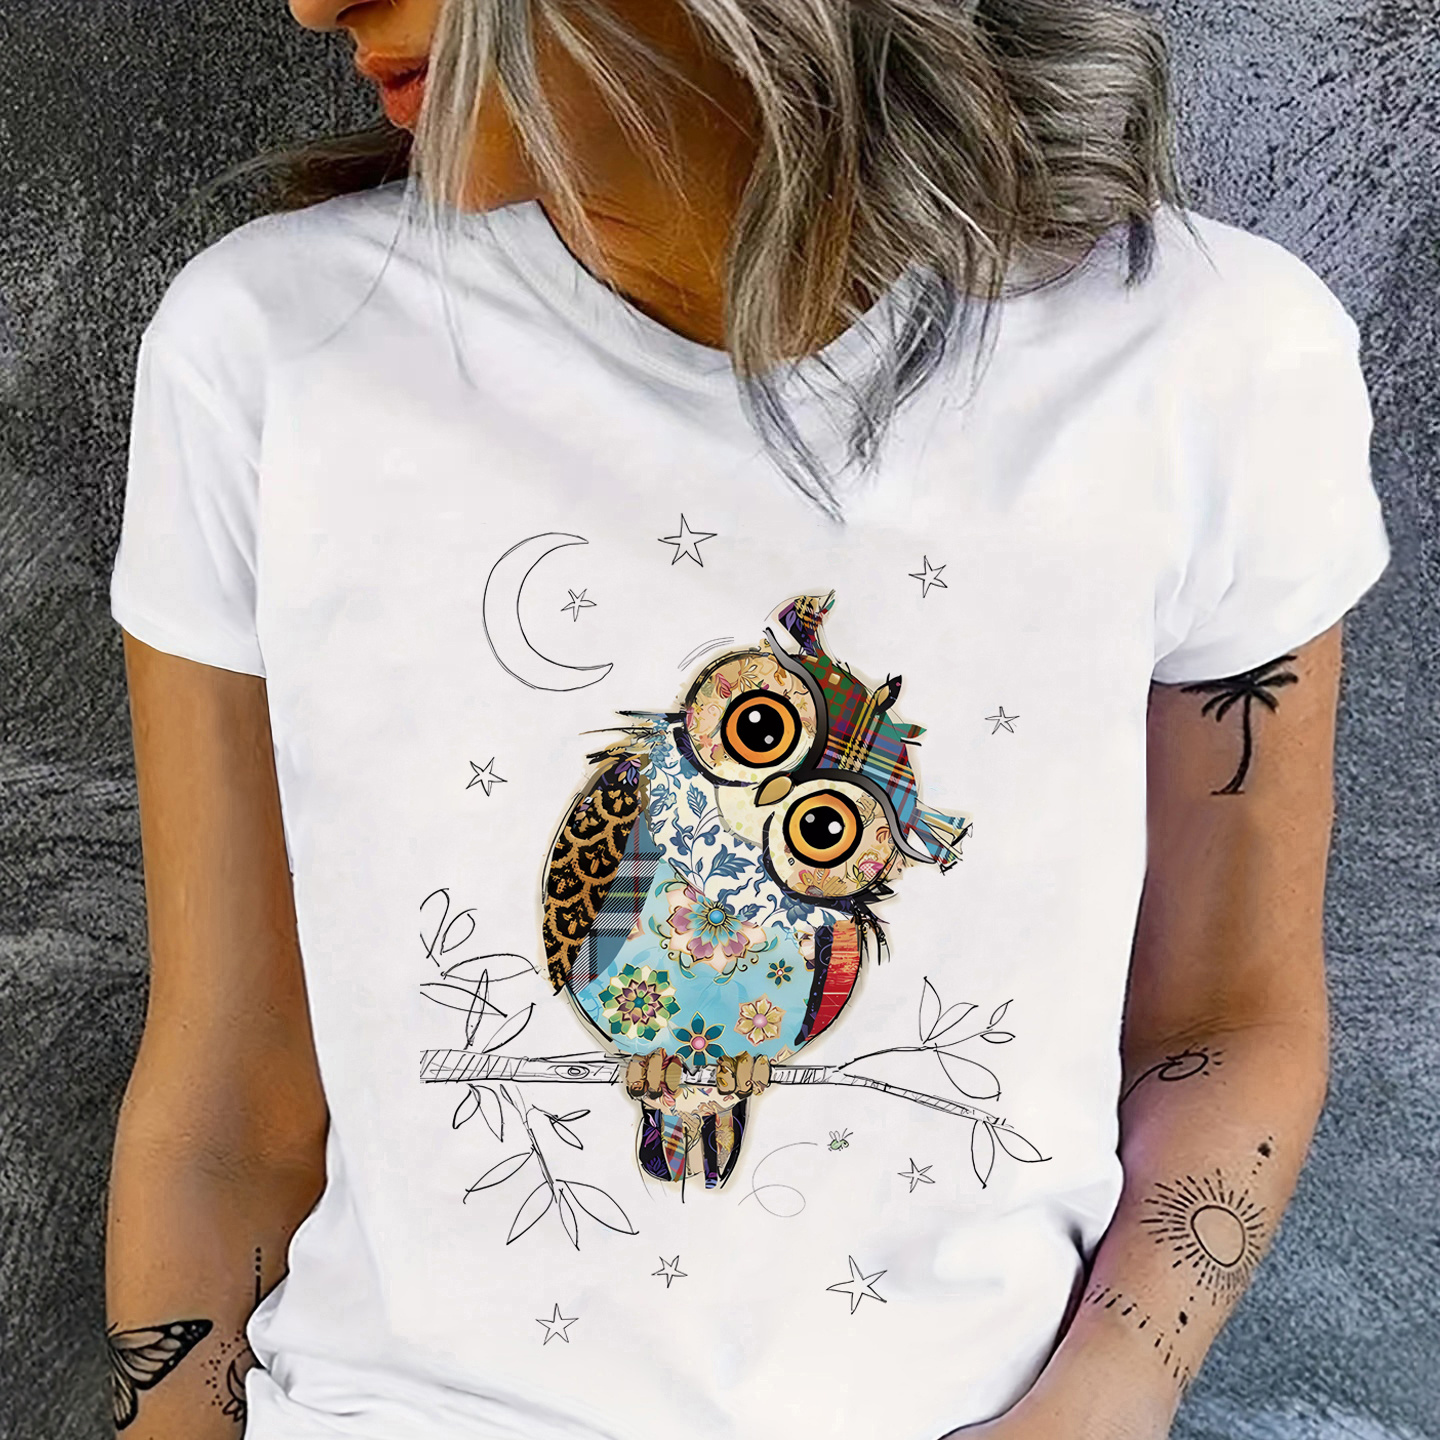 

Owen Owl Animal Print T-shirt, Short Sleeve Crew Neck Casual Top For Summer & Spring, Women's Clothing